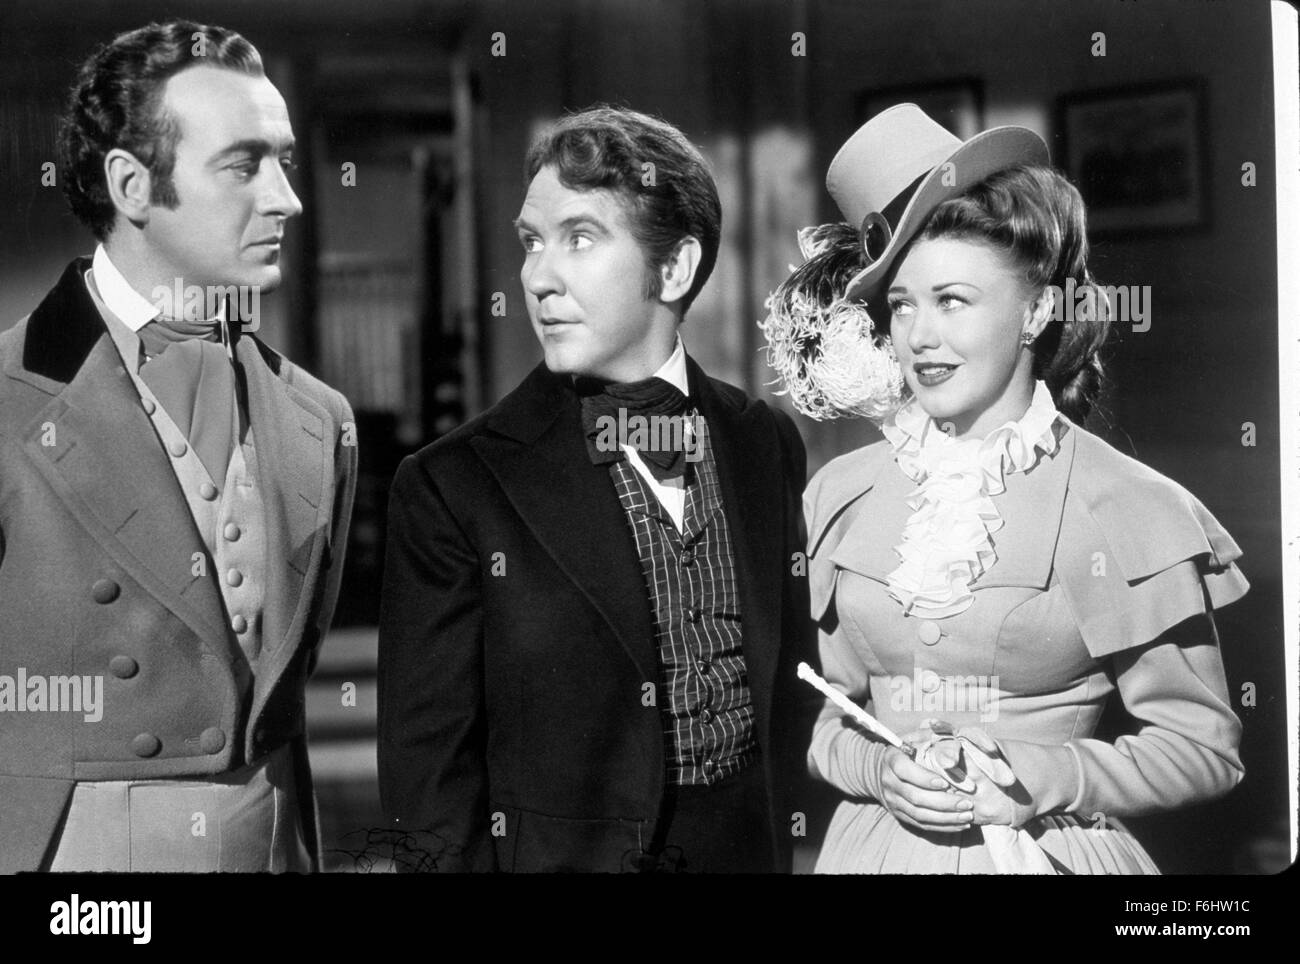 1946, Film Title: MAGNIFICENT DOLL, Director: FRANK BORZAGE, Studio: UNIVERSAL, Pictured: FRANK BORZAGE, BURGESS MEREDITH, DAVID NIVEN, GINGER ROGERS, PERIOD COSTUME, COSTUME, HAT. (Credit Image: SNAP) Stock Photo